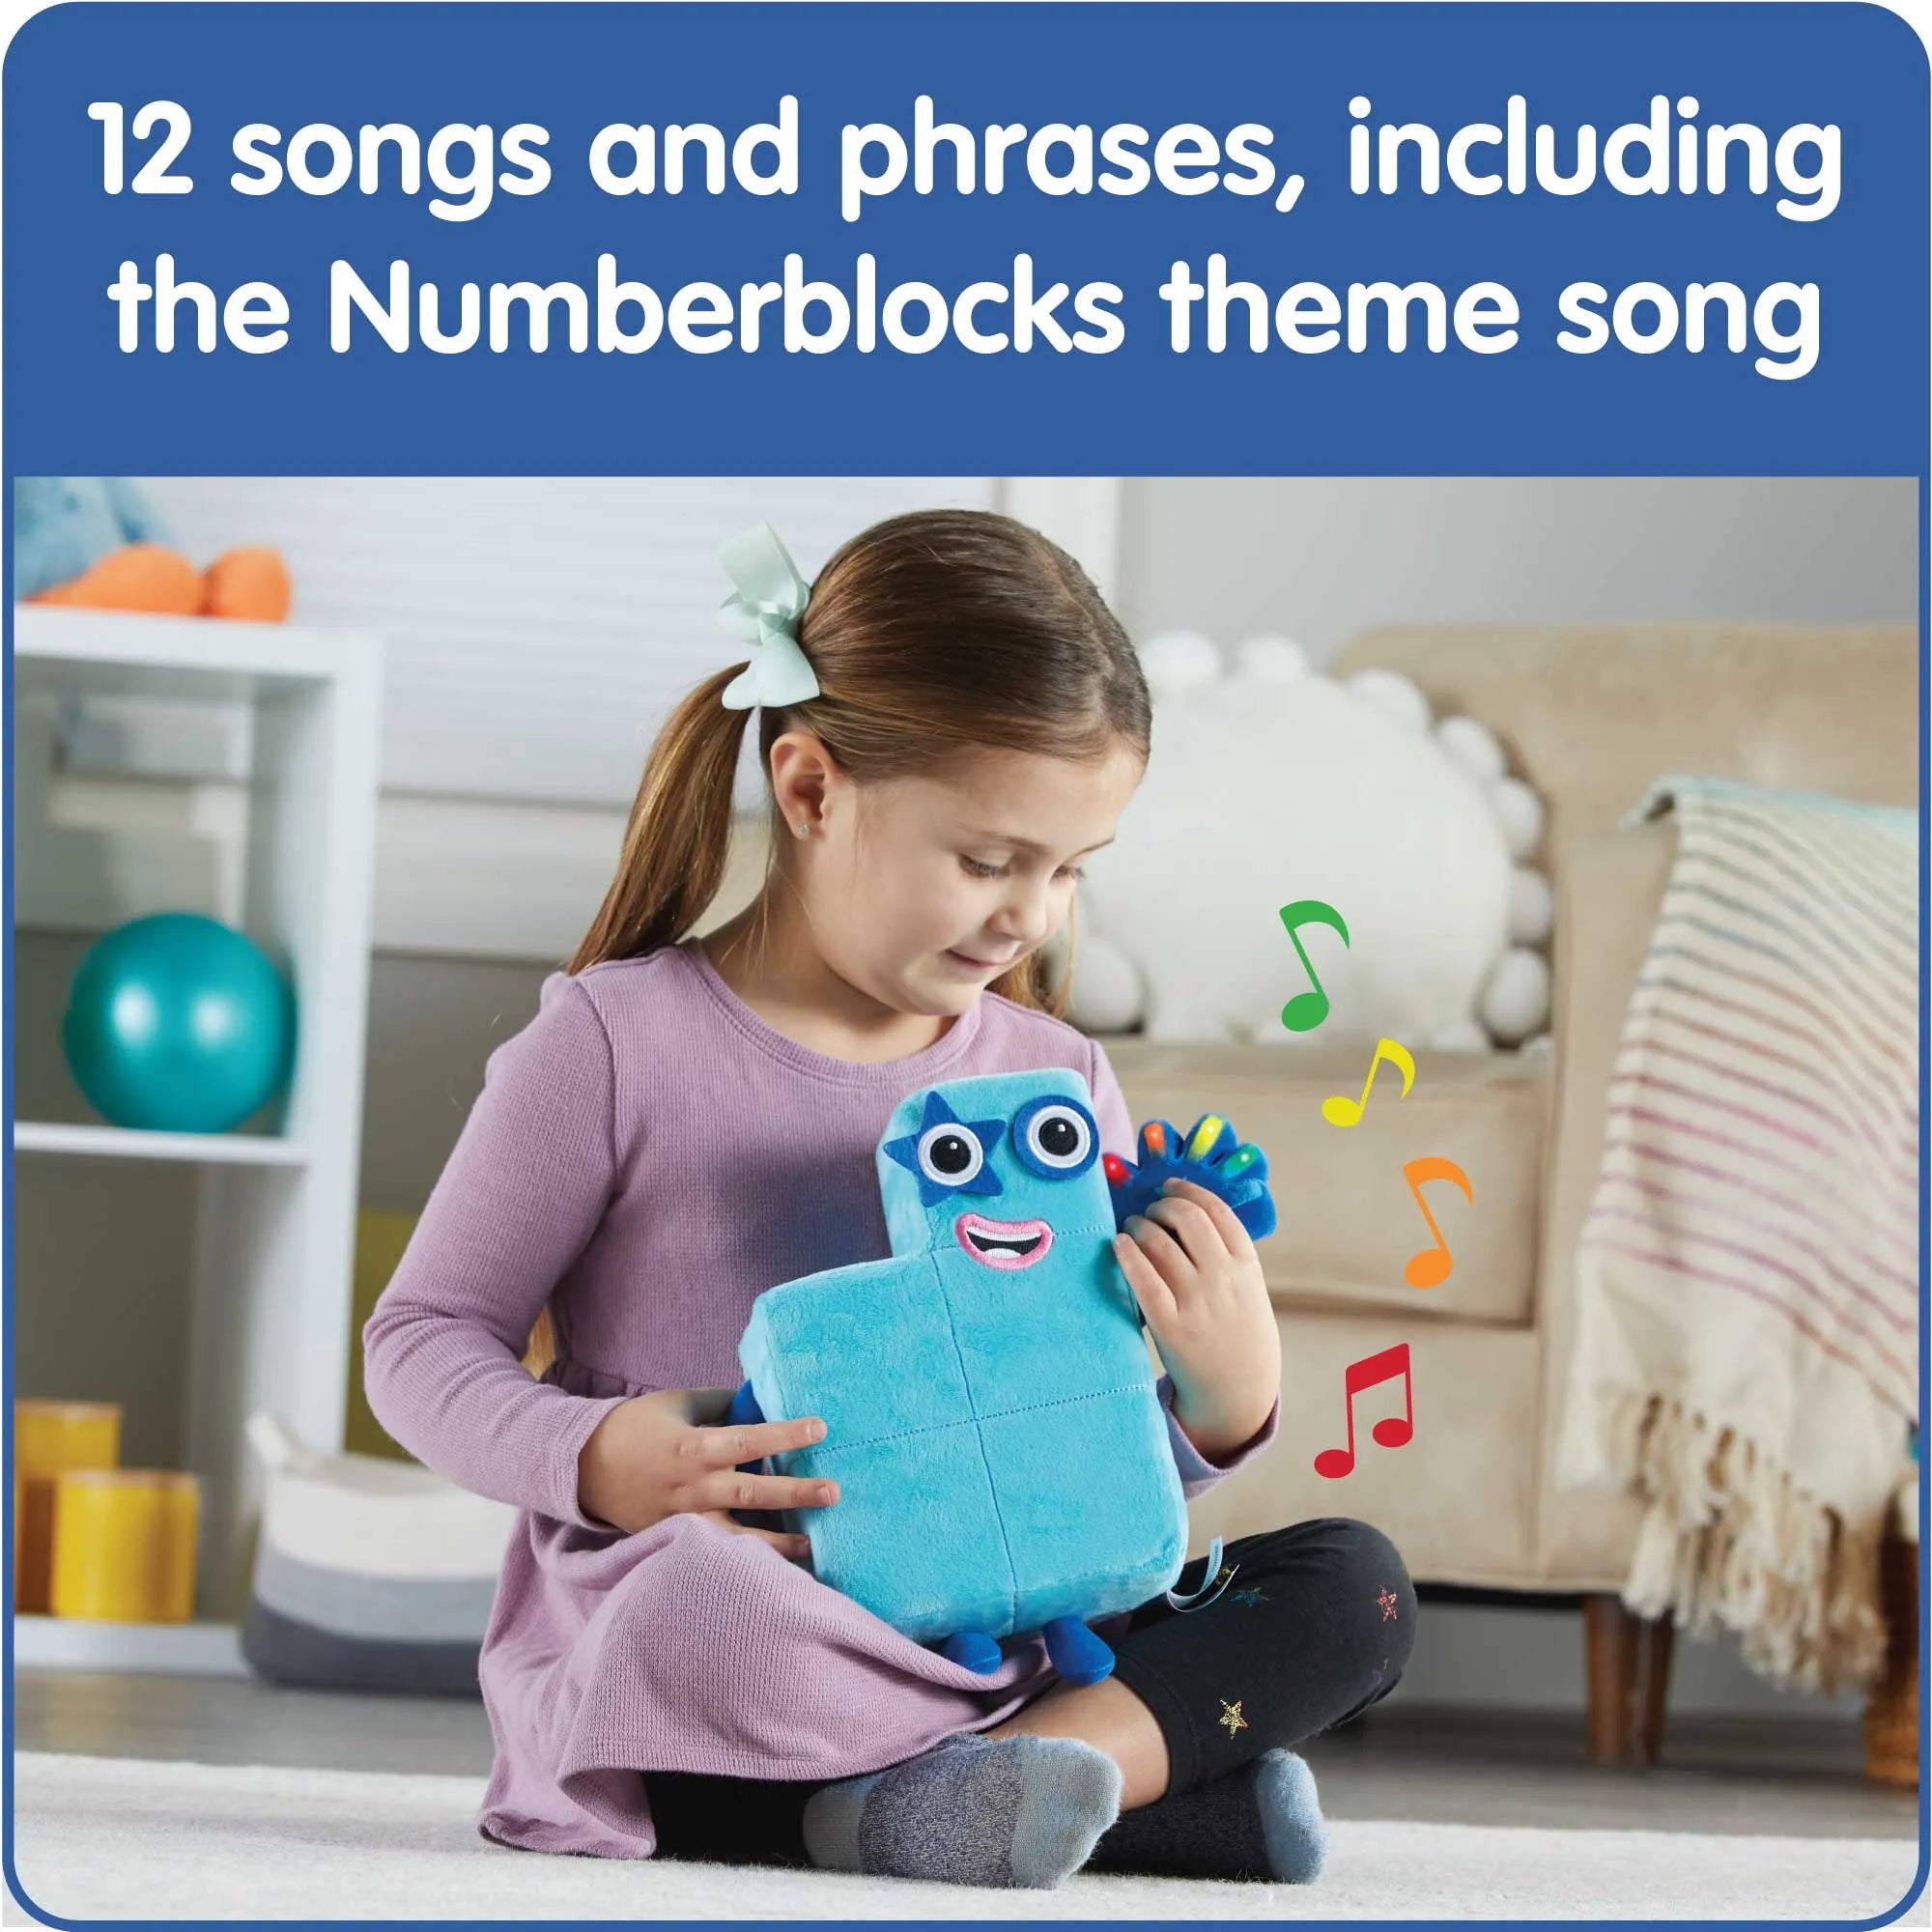 An infographic shows a child holding Sing-Along Numberblock Five and says: 12 songs and phrases, including the Numberblocks theme song.